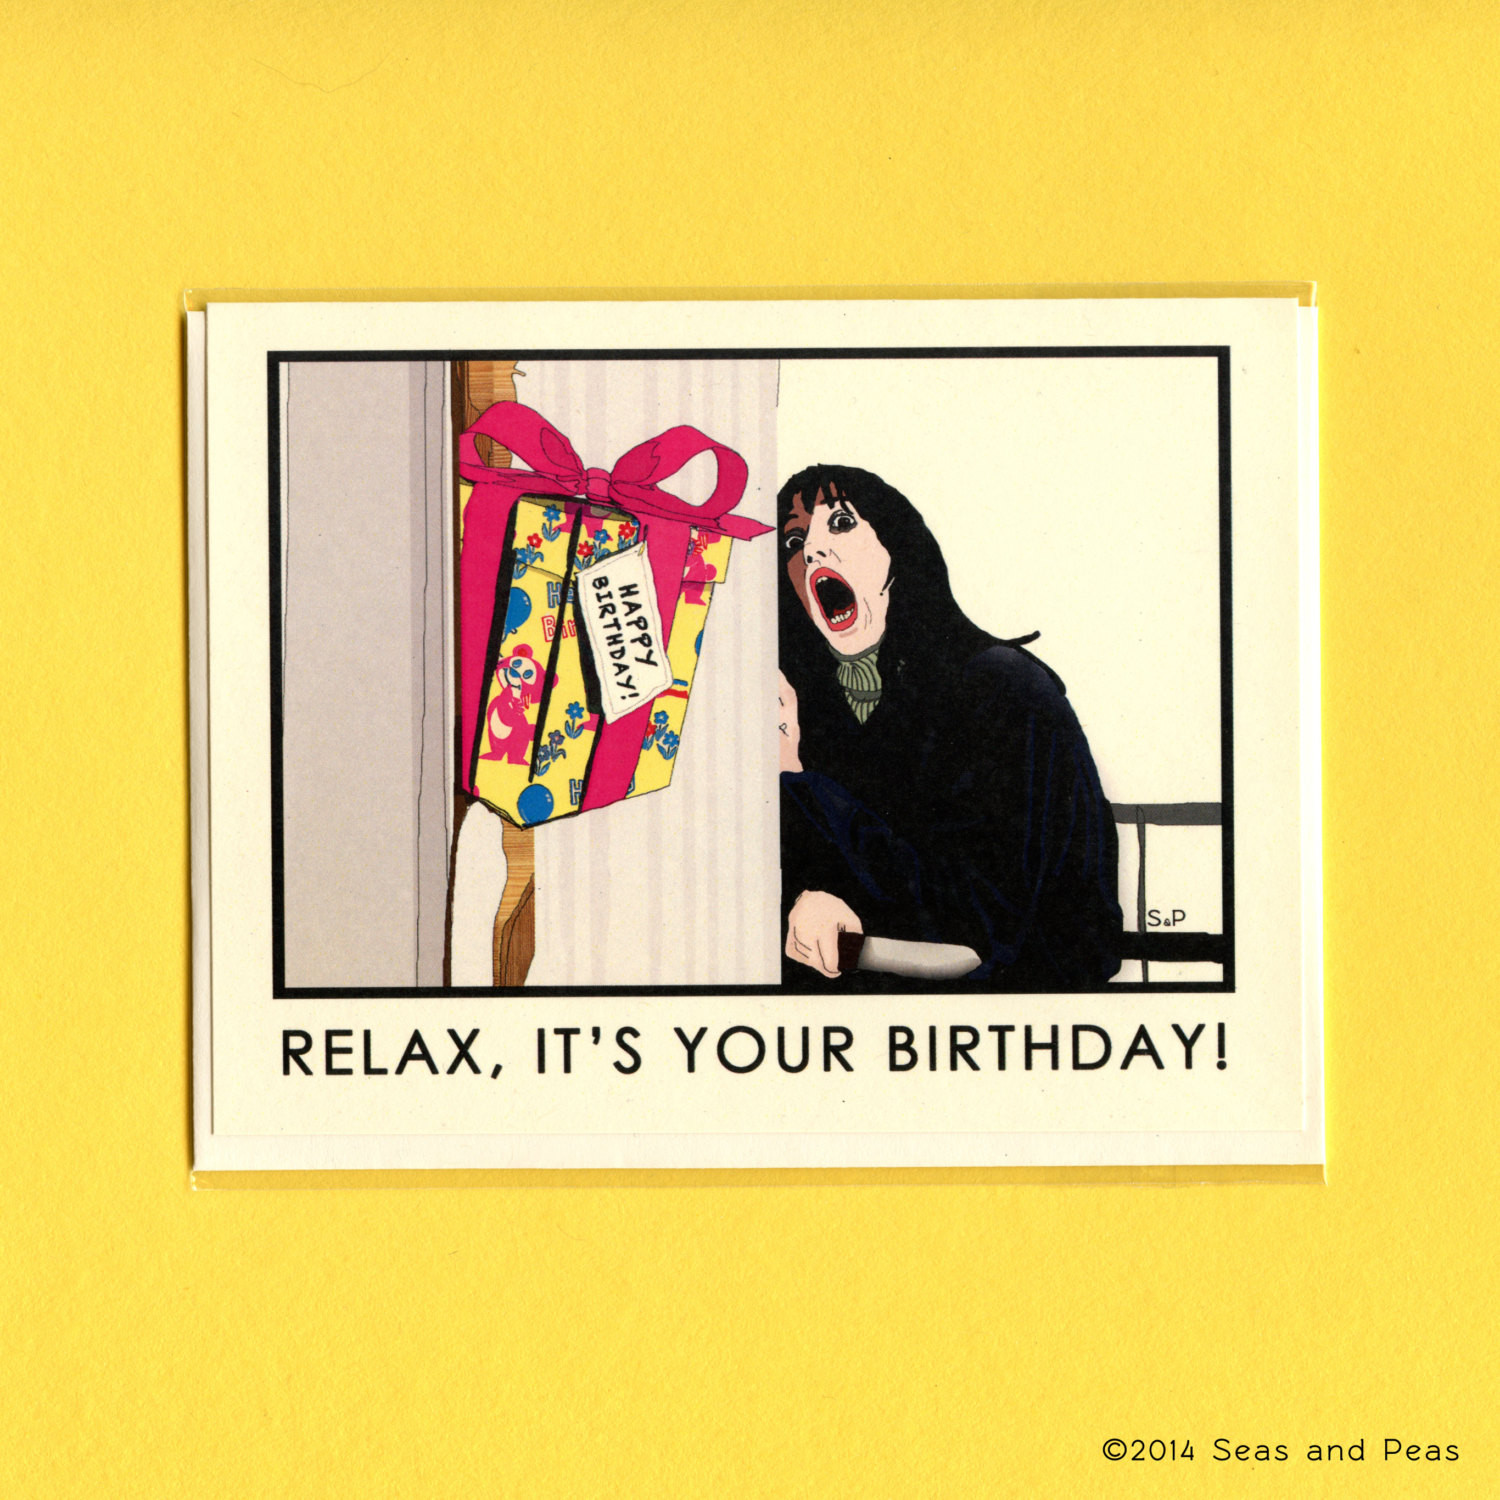 Funny Adult Birthday Cards
 THE SHINING BIRTHDAY Card The Shining Funny by seasandpeas